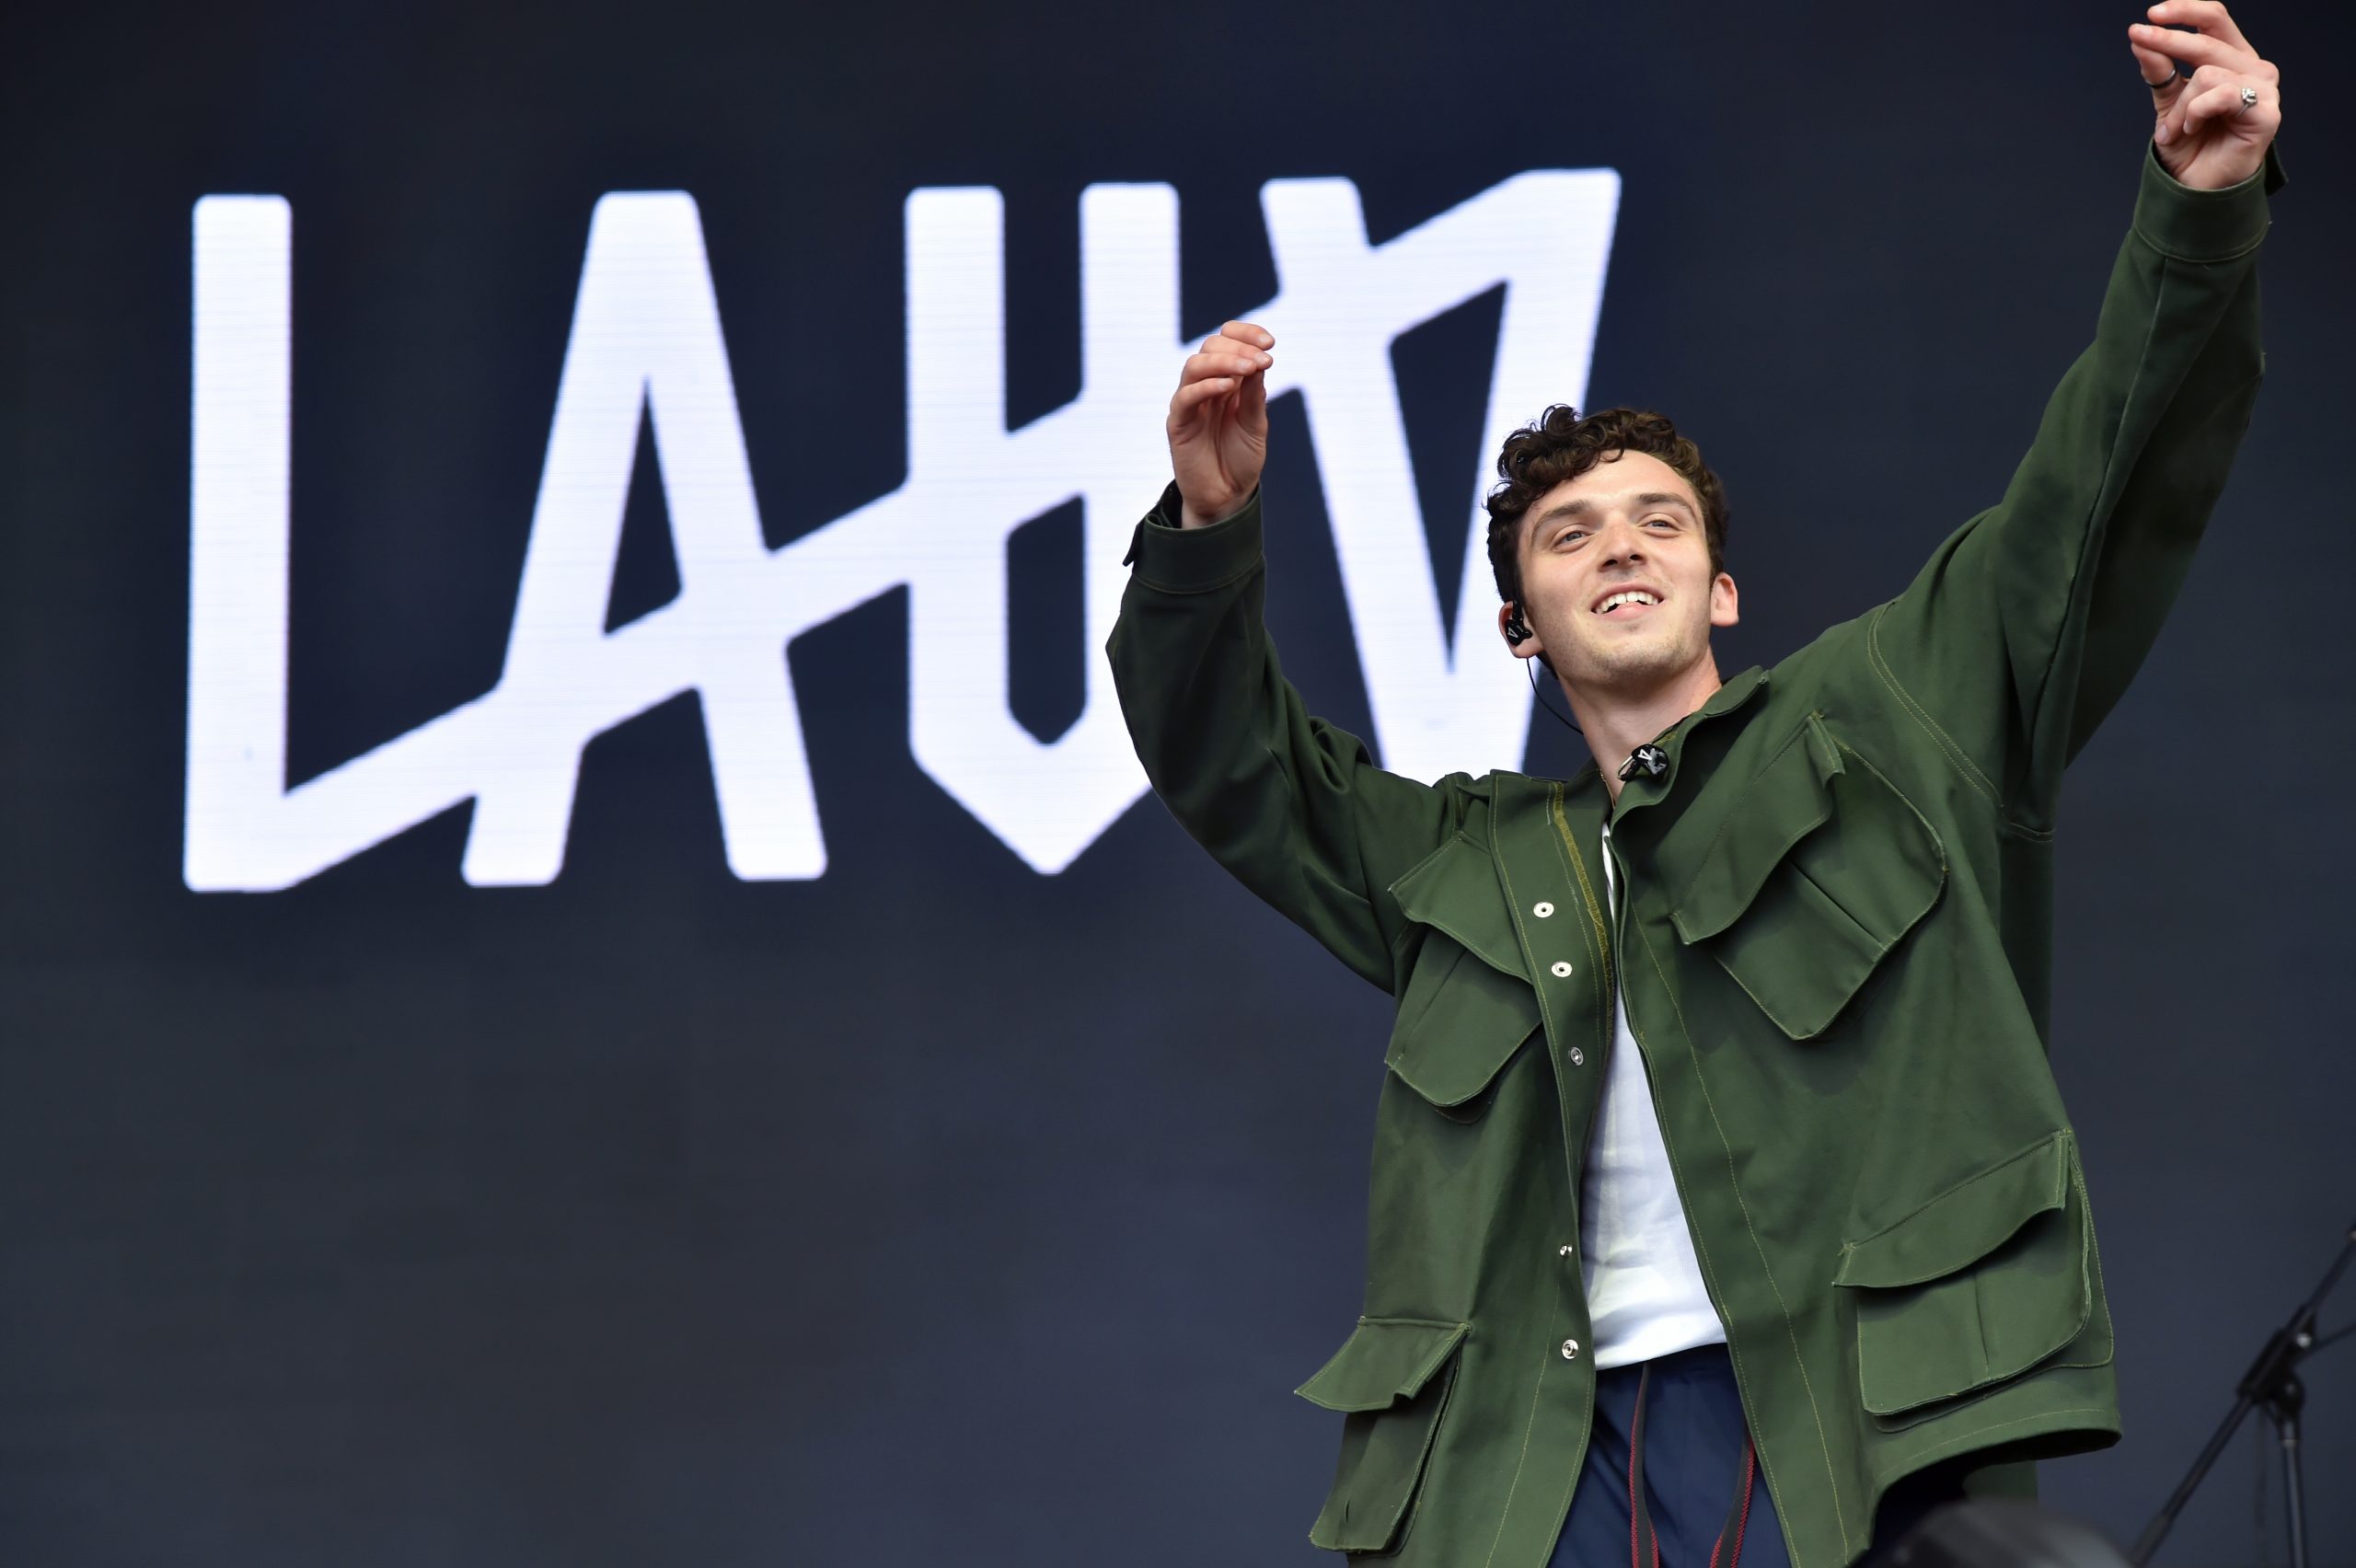 Lauv Releases New Song "Love Like That"